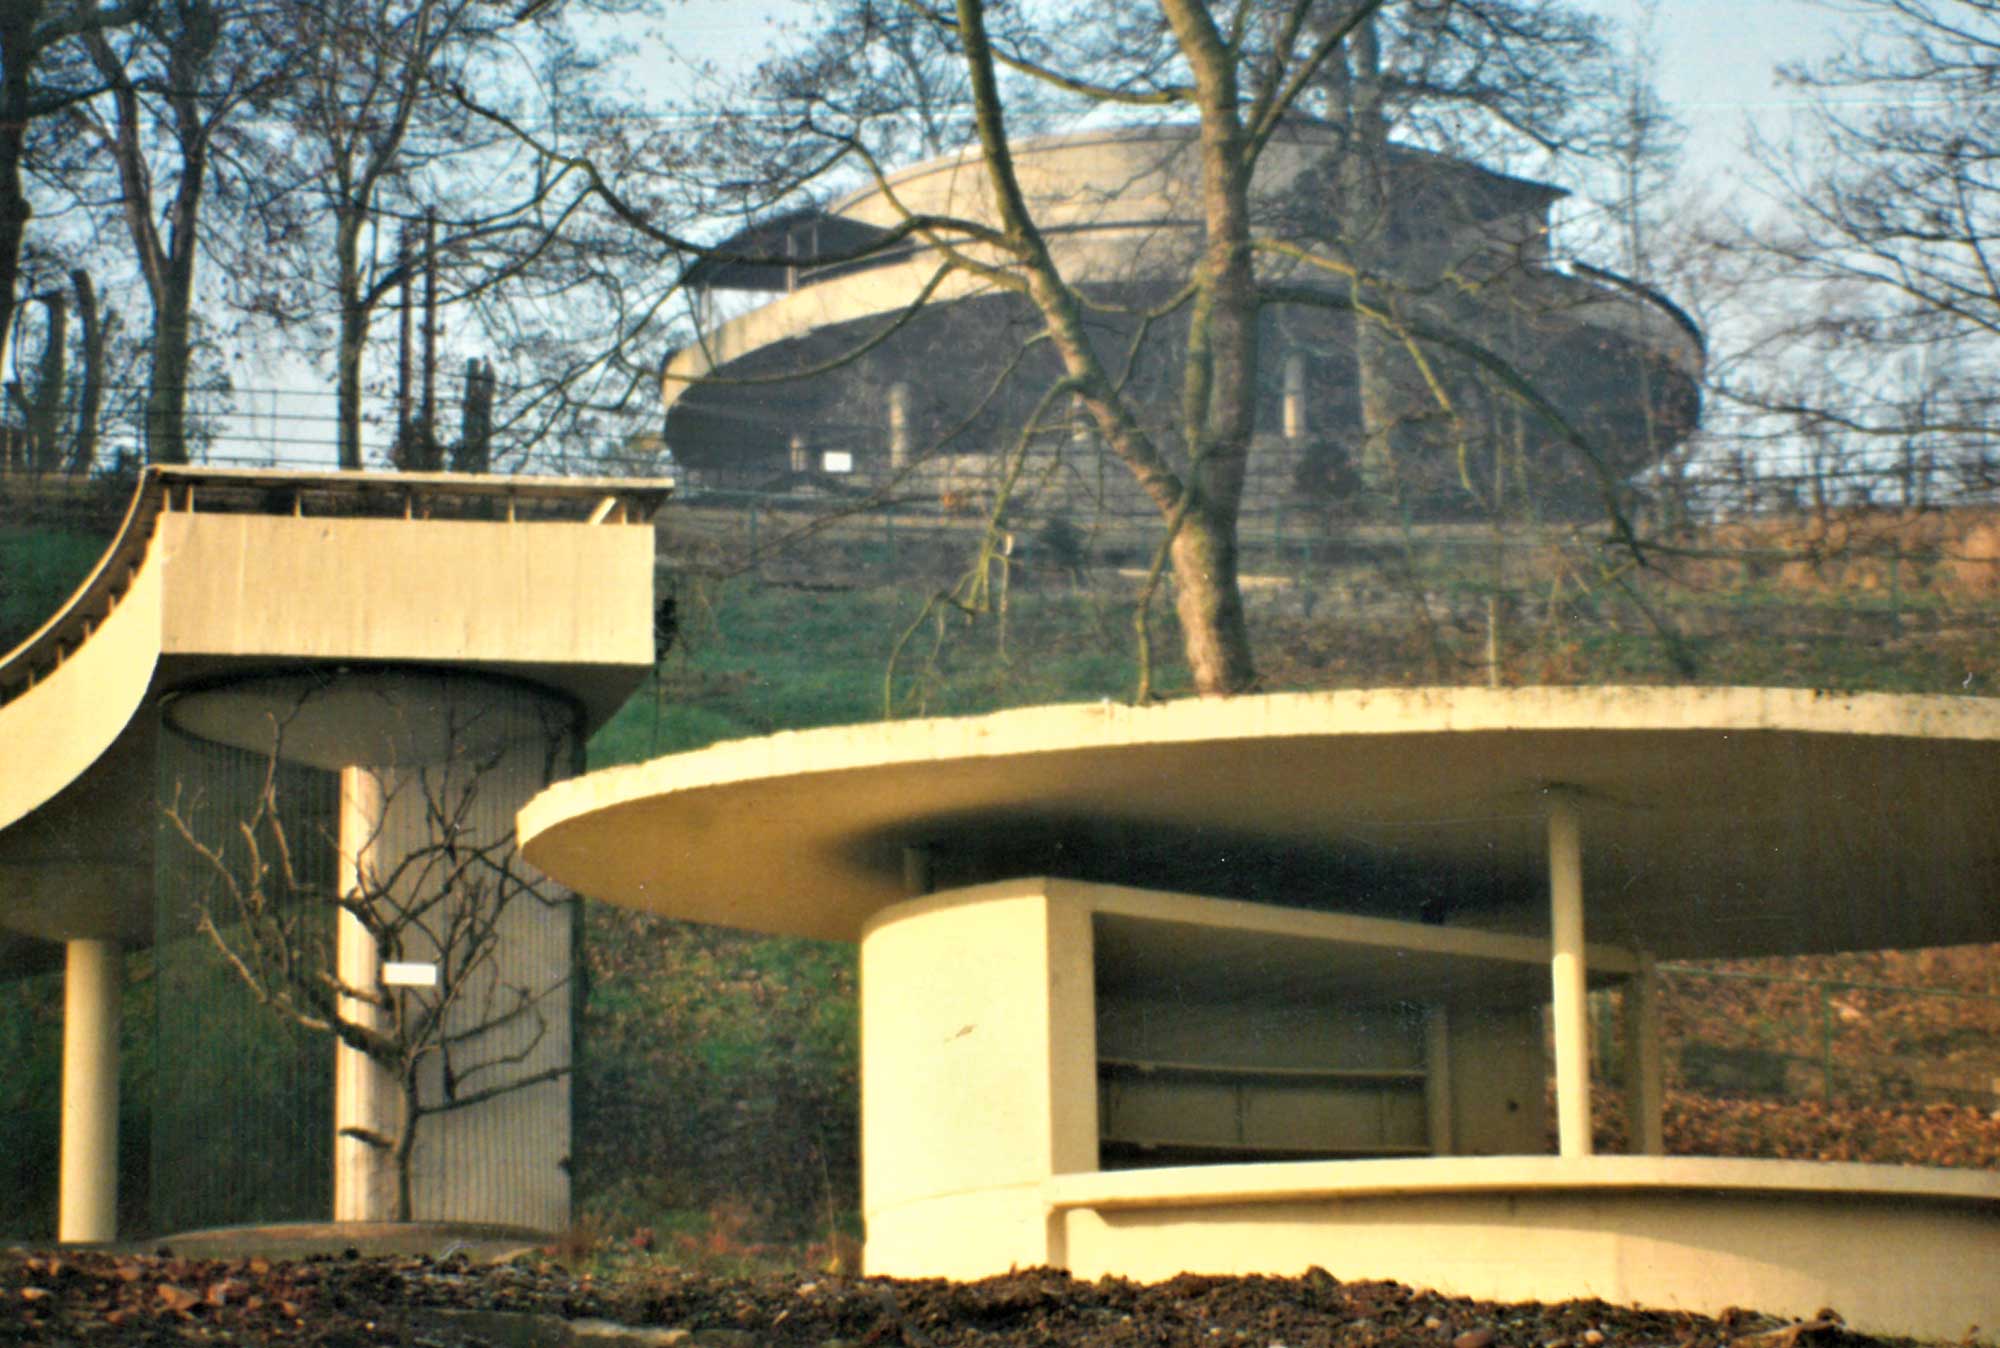 Dudley Zoo pavilions in their landscape context